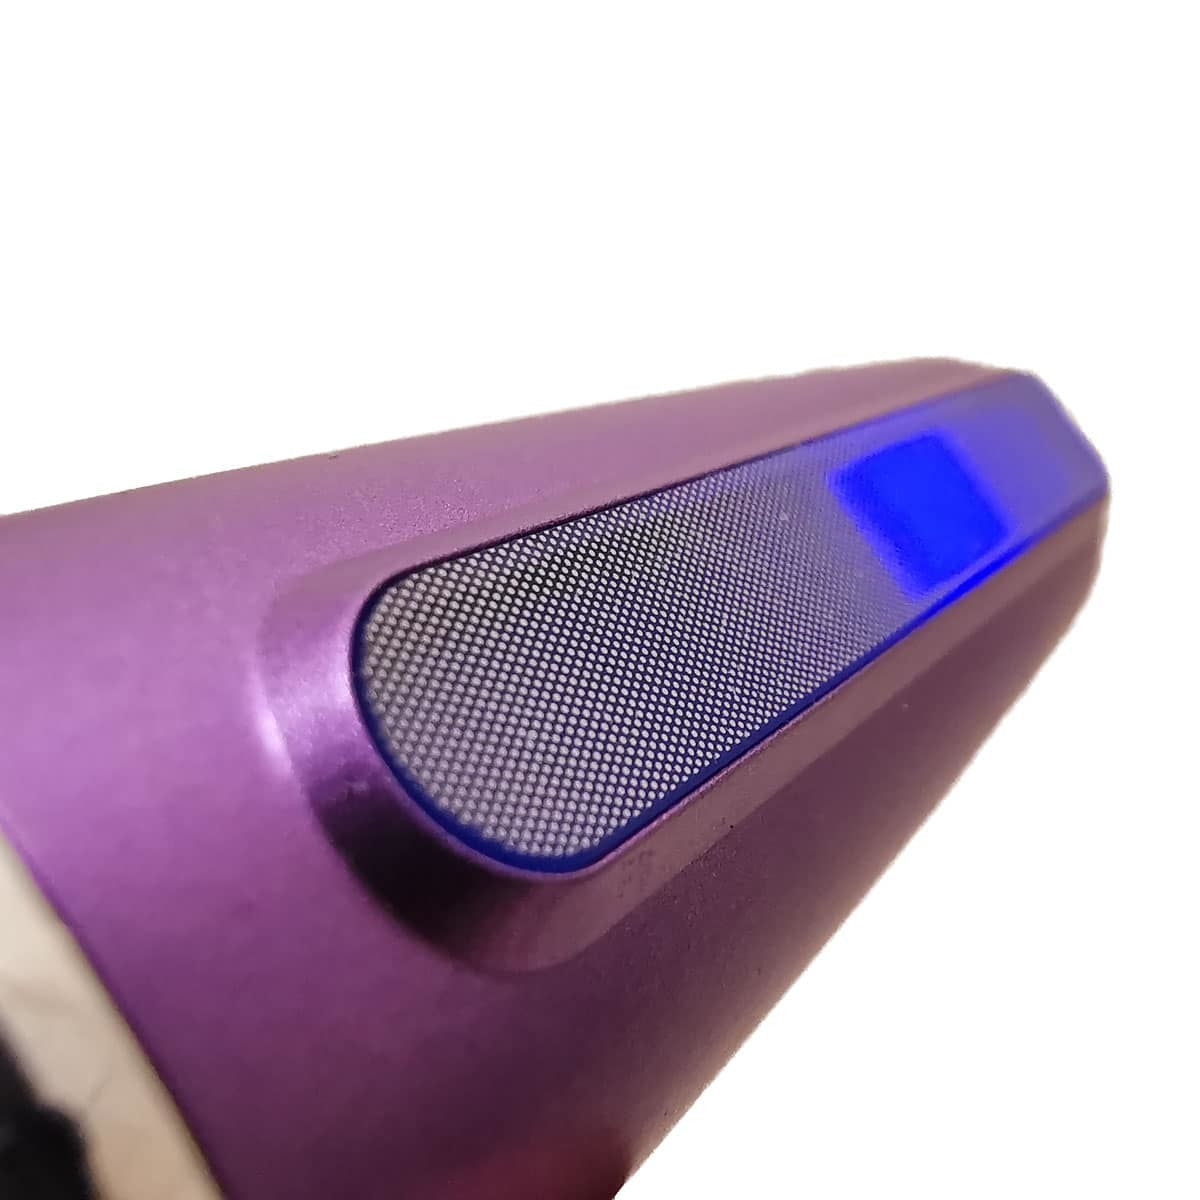 This facial hair remover has built-in  ultraviolet light that kills bacteria - e4cents